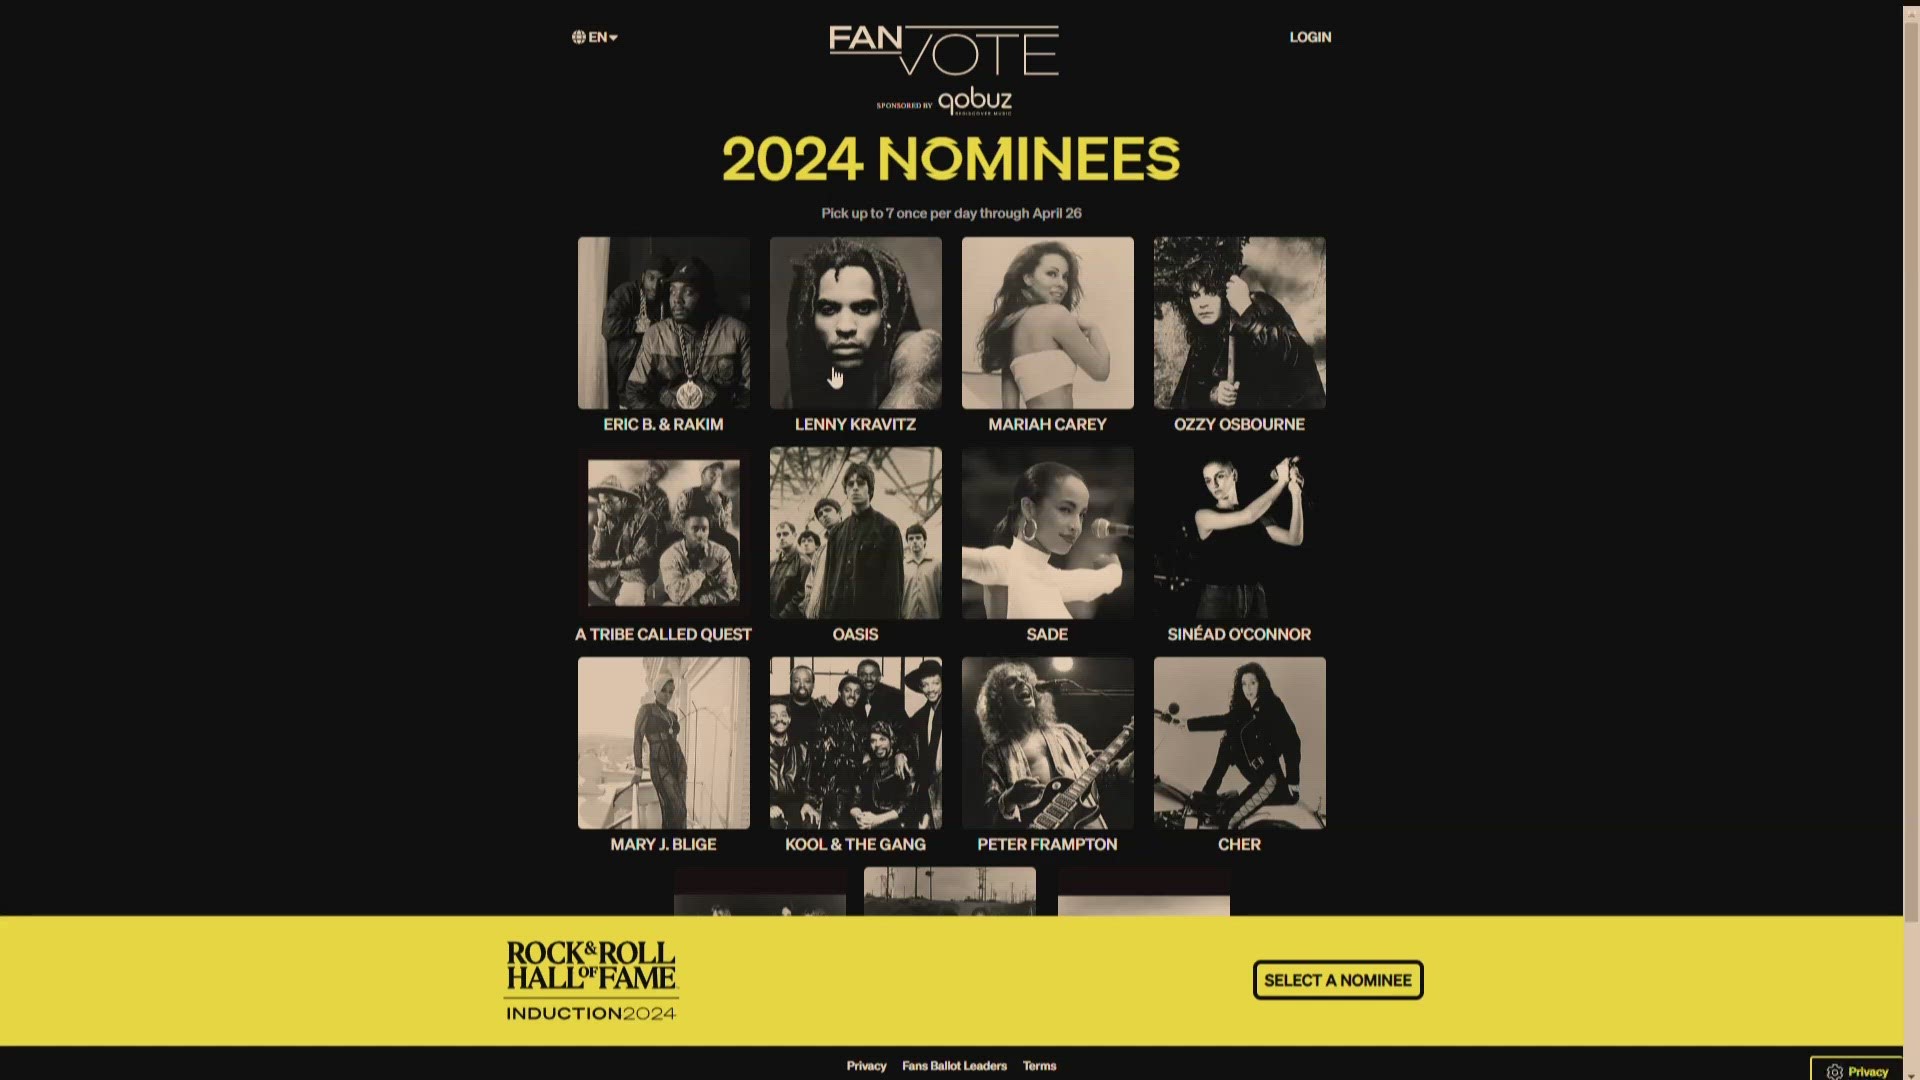 Who is winning the 2024 Rock and Roll Hall of Fame fan vote?